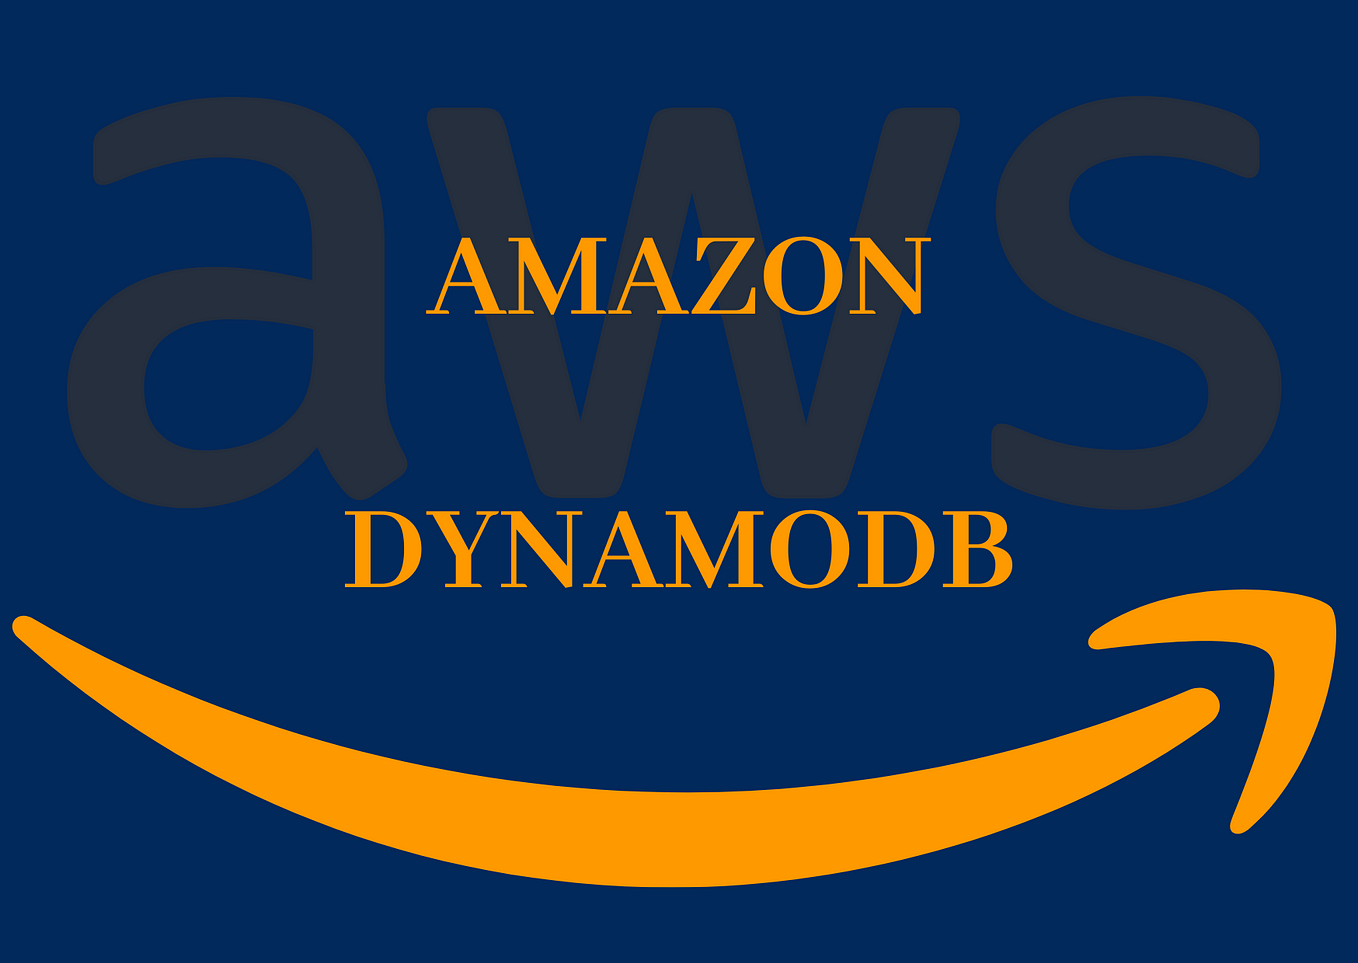 High performance and scale with Amazon DynamoDB